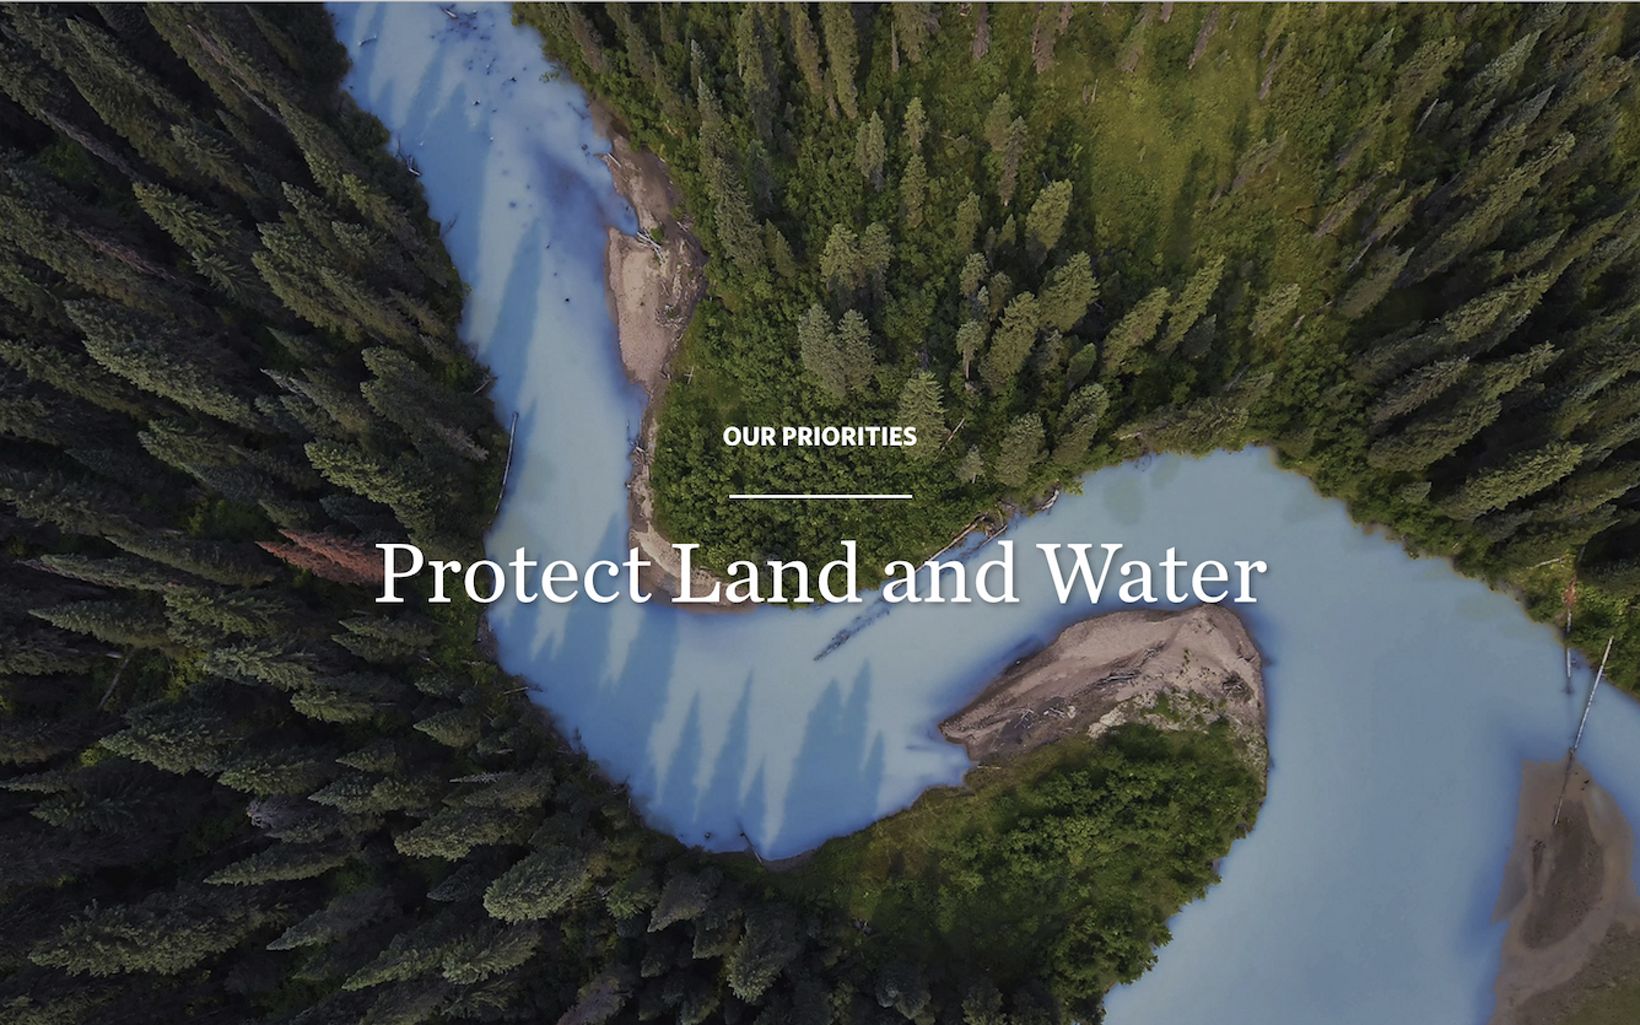 Aerial view of a river through a forests with navigational text: 'Our priorities, Protect land and water'.